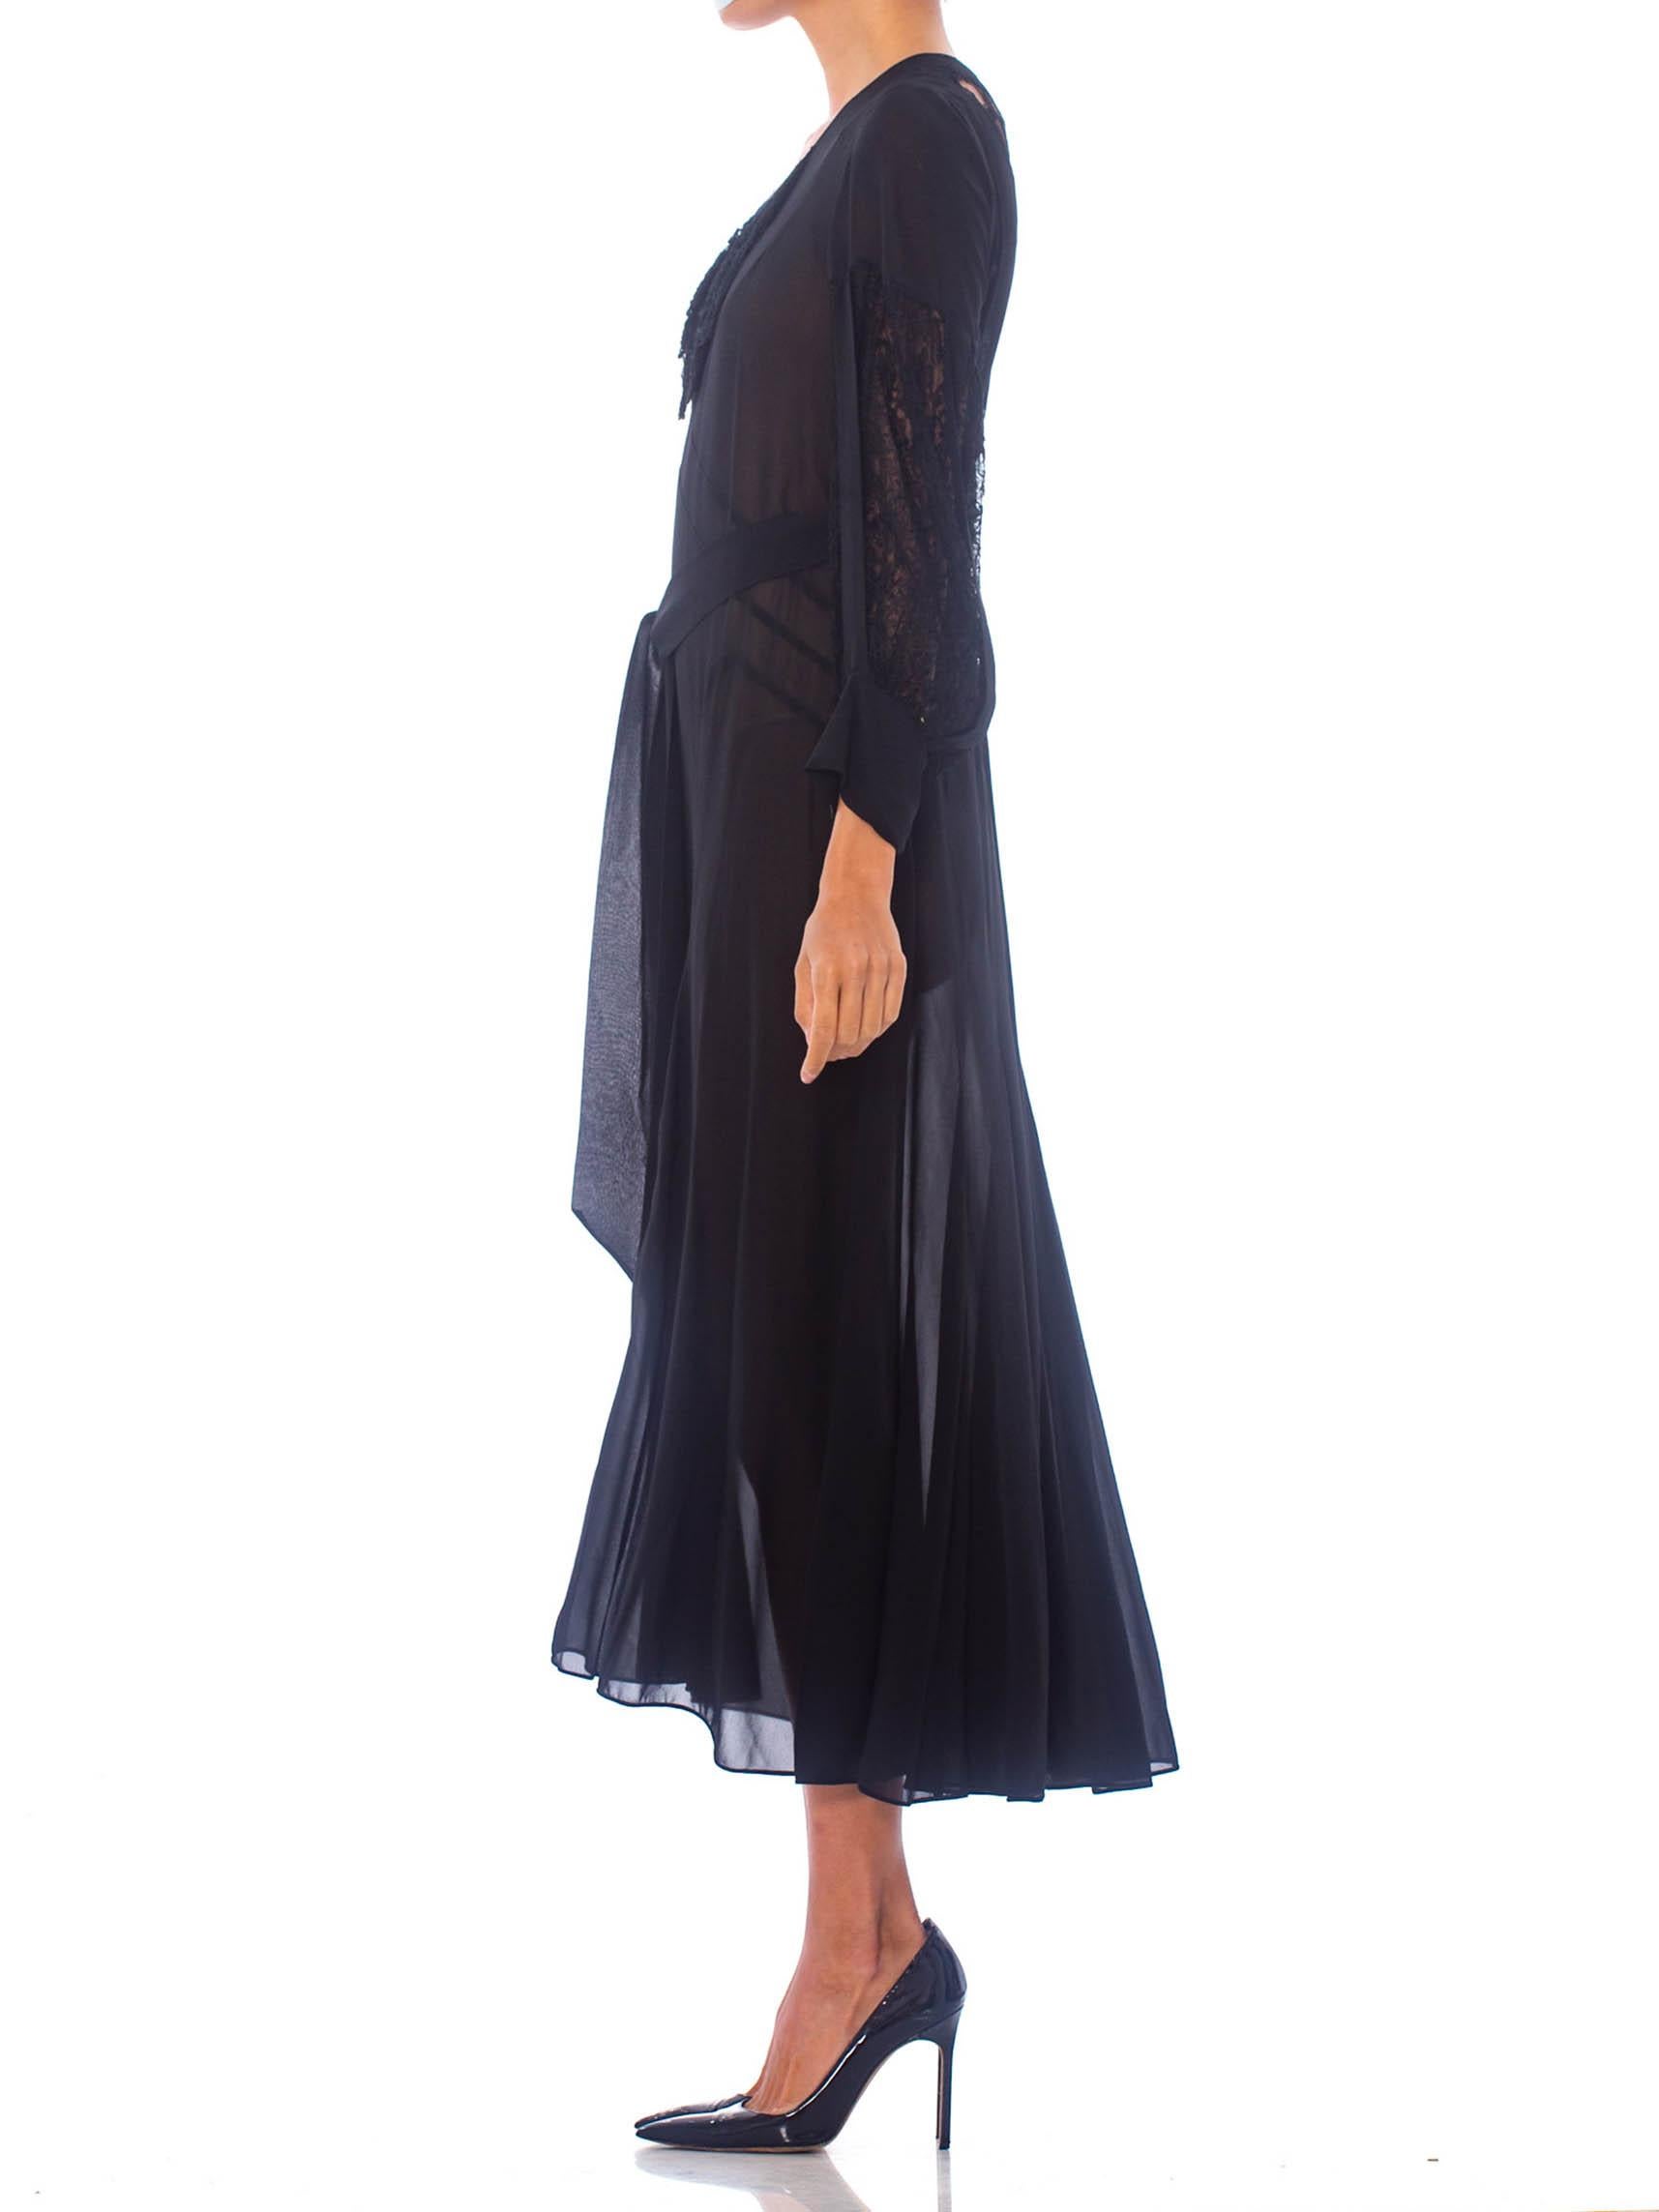 Women's 1930S Black Silk Chiffon Tie Waist Dress With Lace Inset Sleeves For Sale